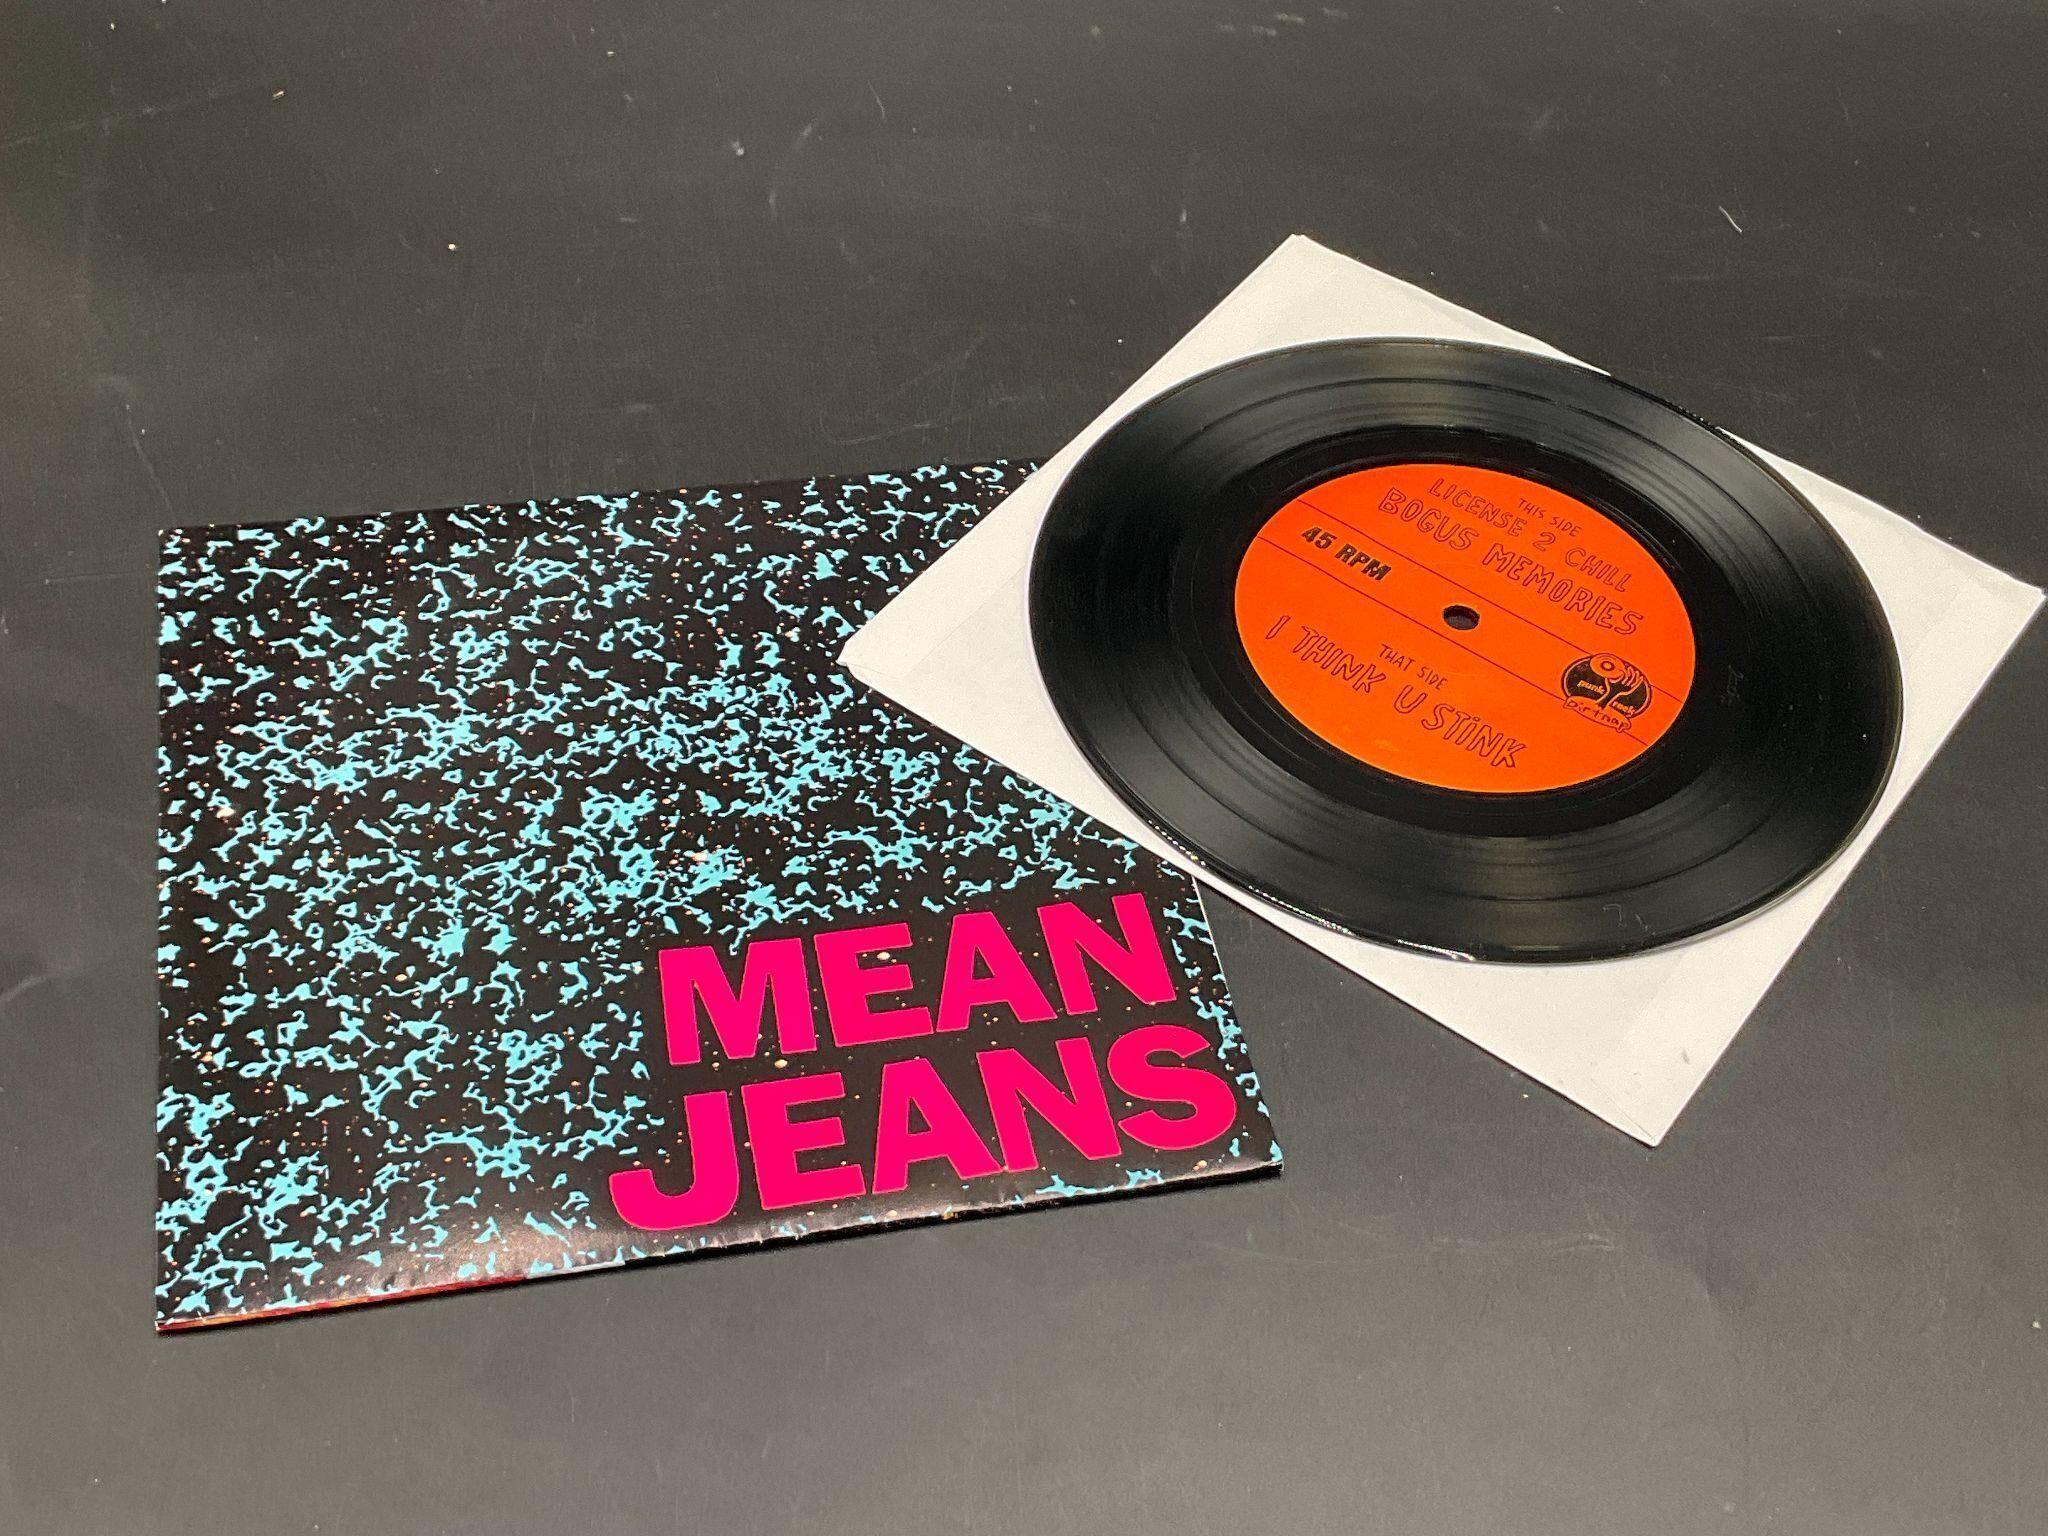 2009 Mean Jeans "Licensed 2 Chill" Punk 7" Single